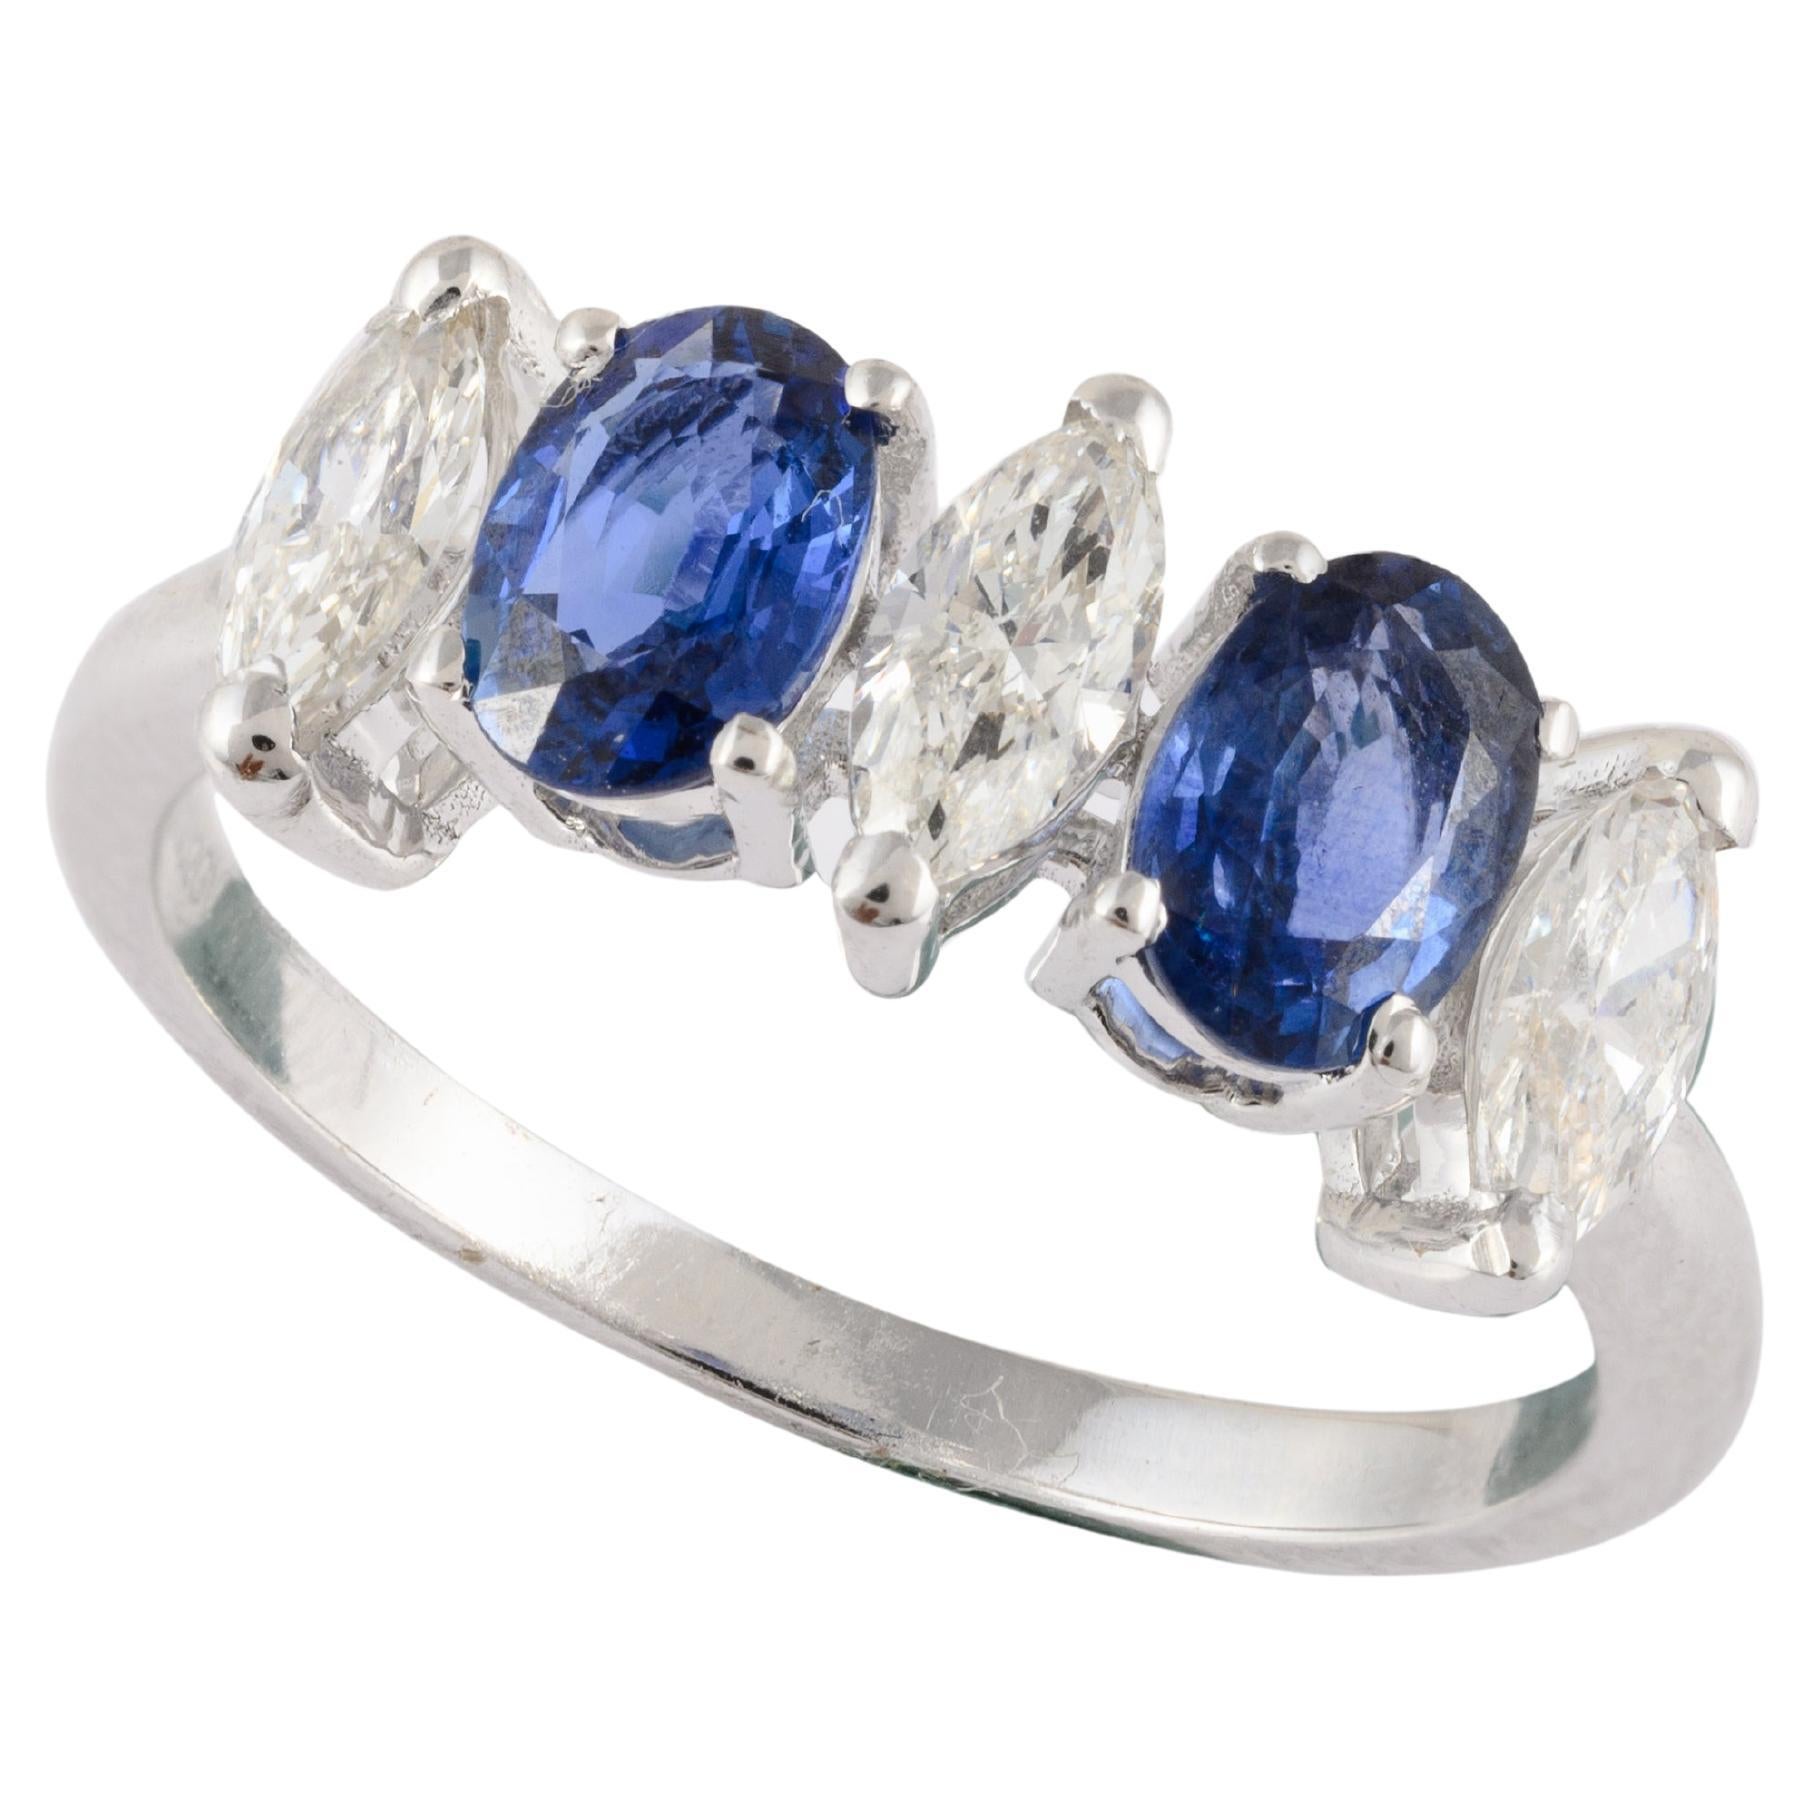 Stunning Diamond Blue Sapphire Engagement Ring For Her in Solid 18kt White Gold